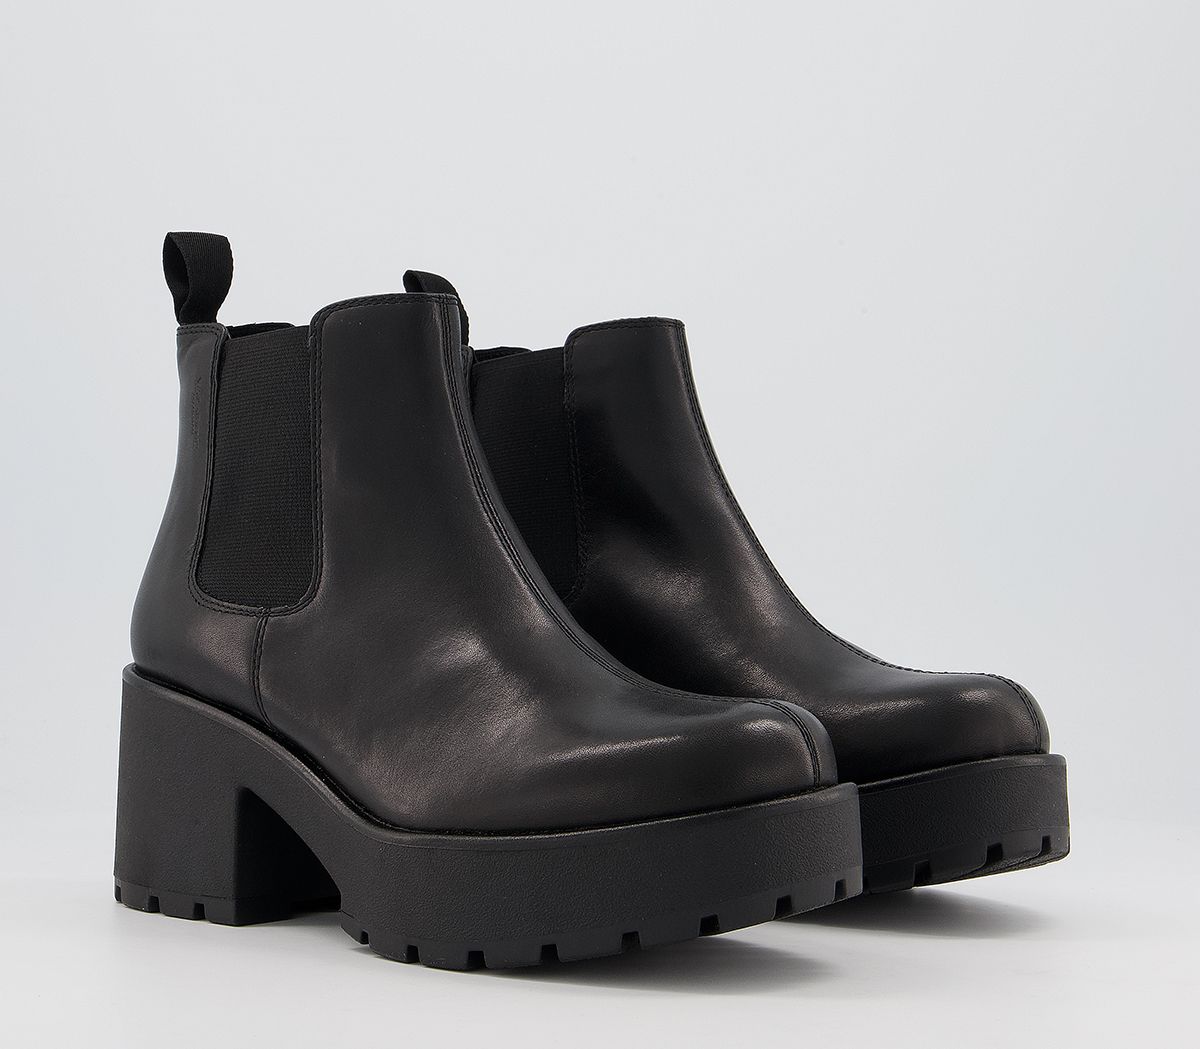 Vagabond Dioon Elastic Chelsea Boots Exclusive Black Leather - Ankle Boots